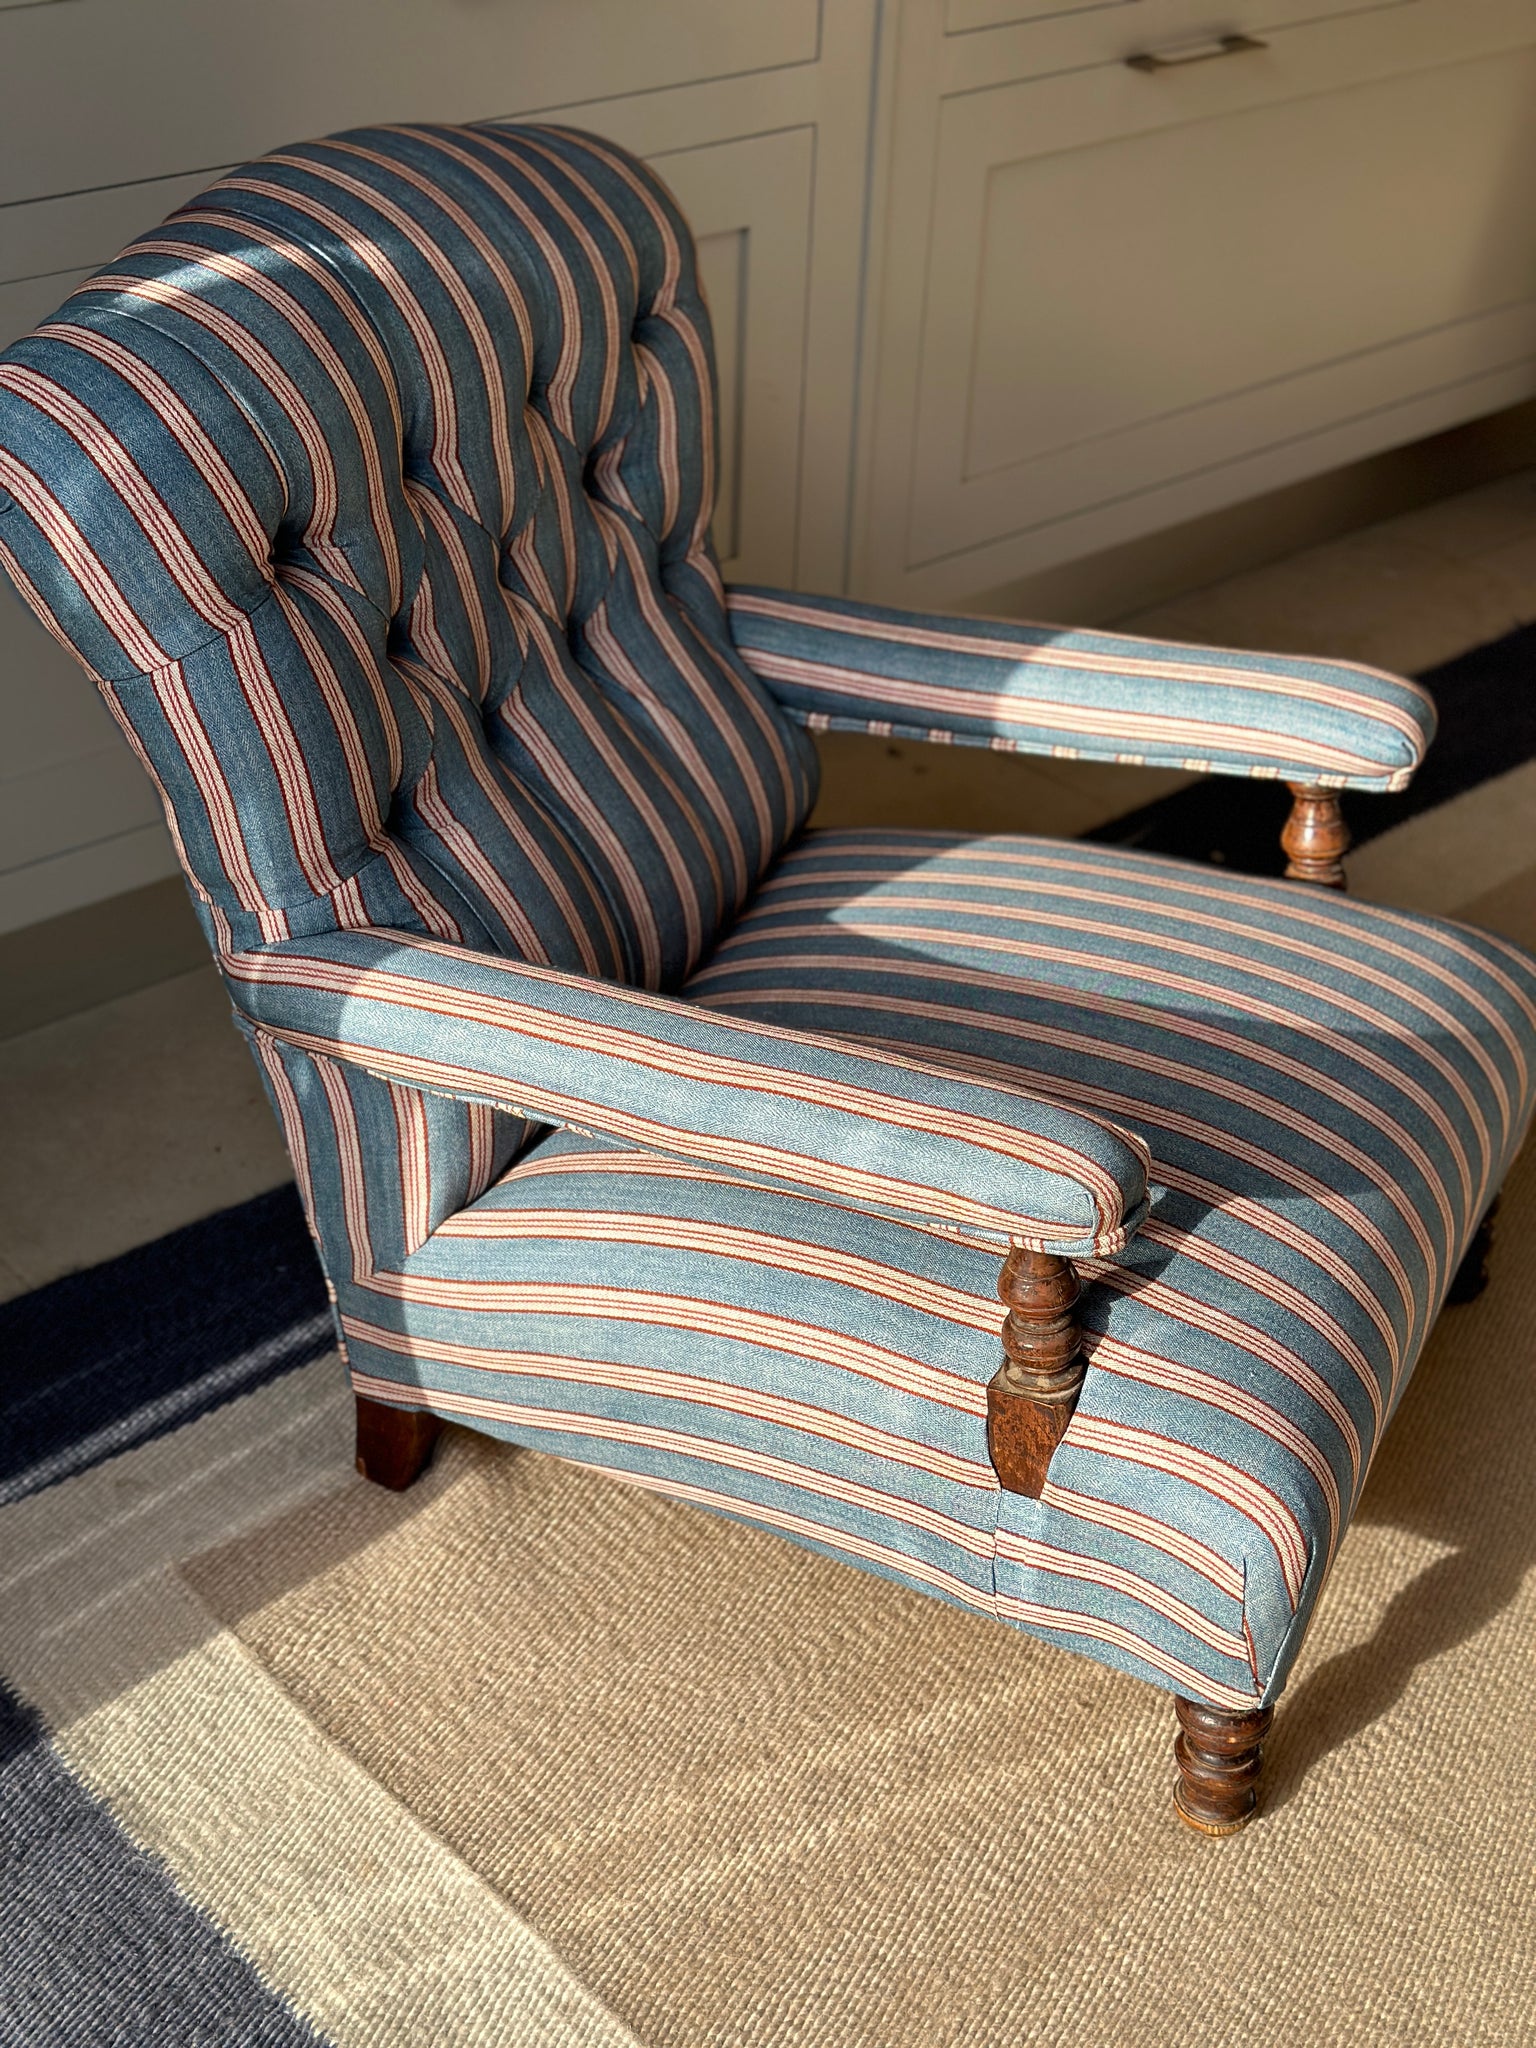 Country House Open Chair in RK Tynemouth Blue